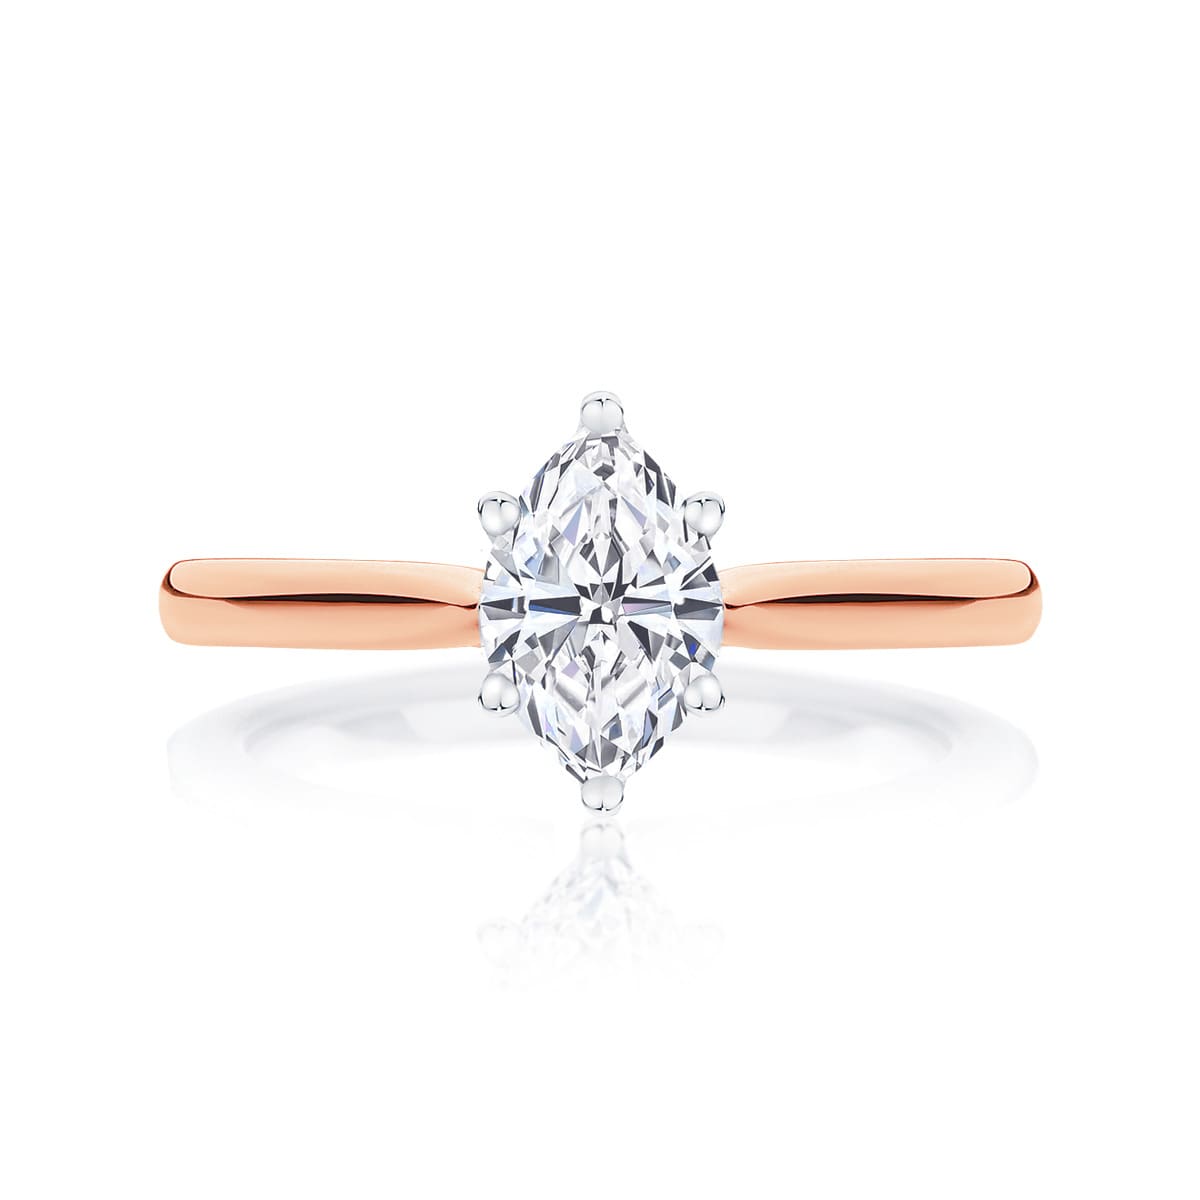 Marquise Diamond Solitaire Ring in Rose Gold | Ballerina (Marquise)